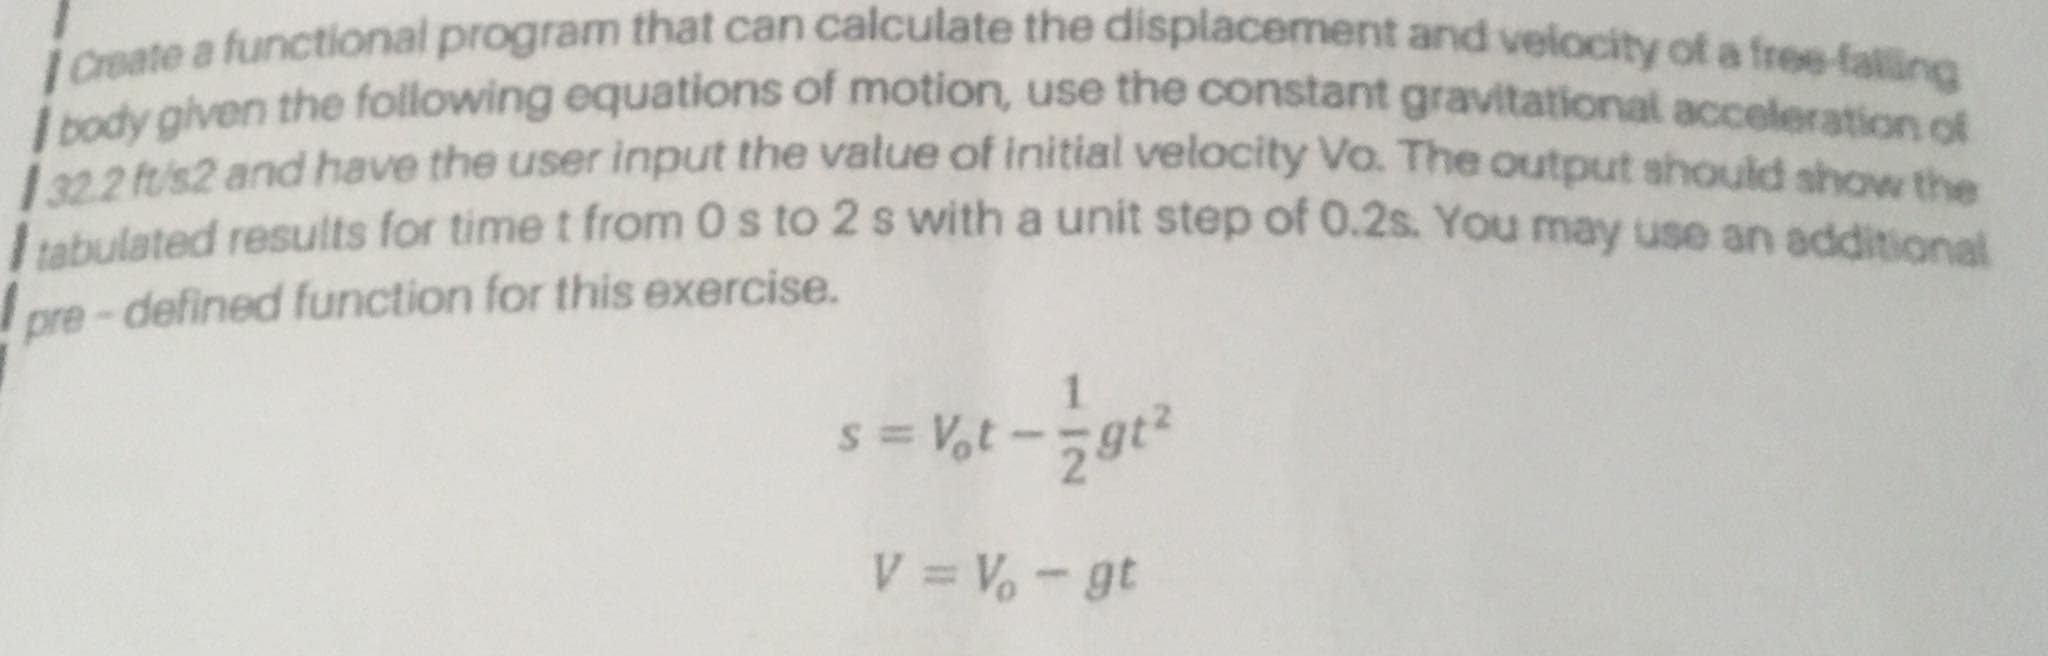 Create a functional program that can calculate the displacement and velocity of a free-falling
ody given the following equations of motion, use the constant gravitational acceleration
a 2tris2 and have the user input the value of initial velocity Vo. The output should show the
lated results for time t from 0 s to 2 s with a unit step of 0.2s. You may use an additional
pre-defined function for this exercise.
s = V,t - -gt²
V = V-gt
